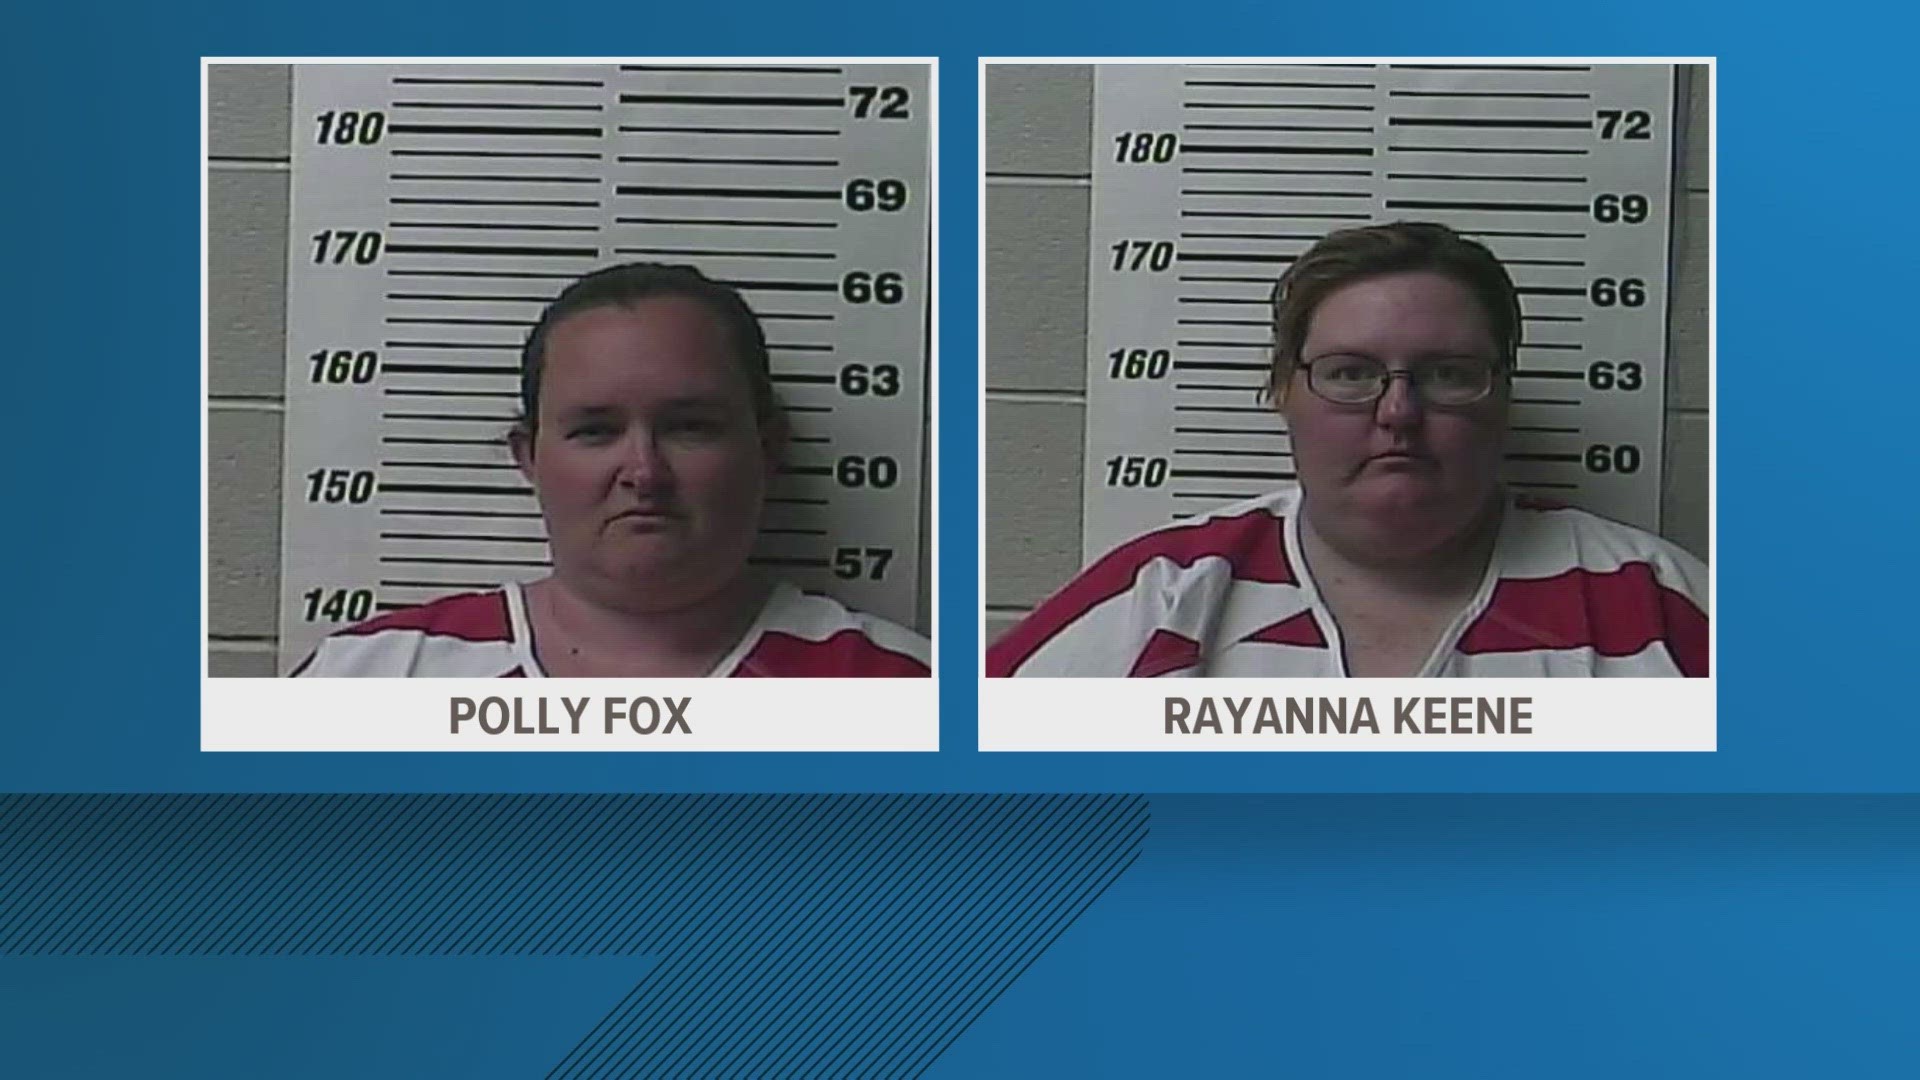 The Cocke Co. Sheriff's Office said Polly Fox called 911 after finding her mom dead. She was later arrested and charged in connection with her death.